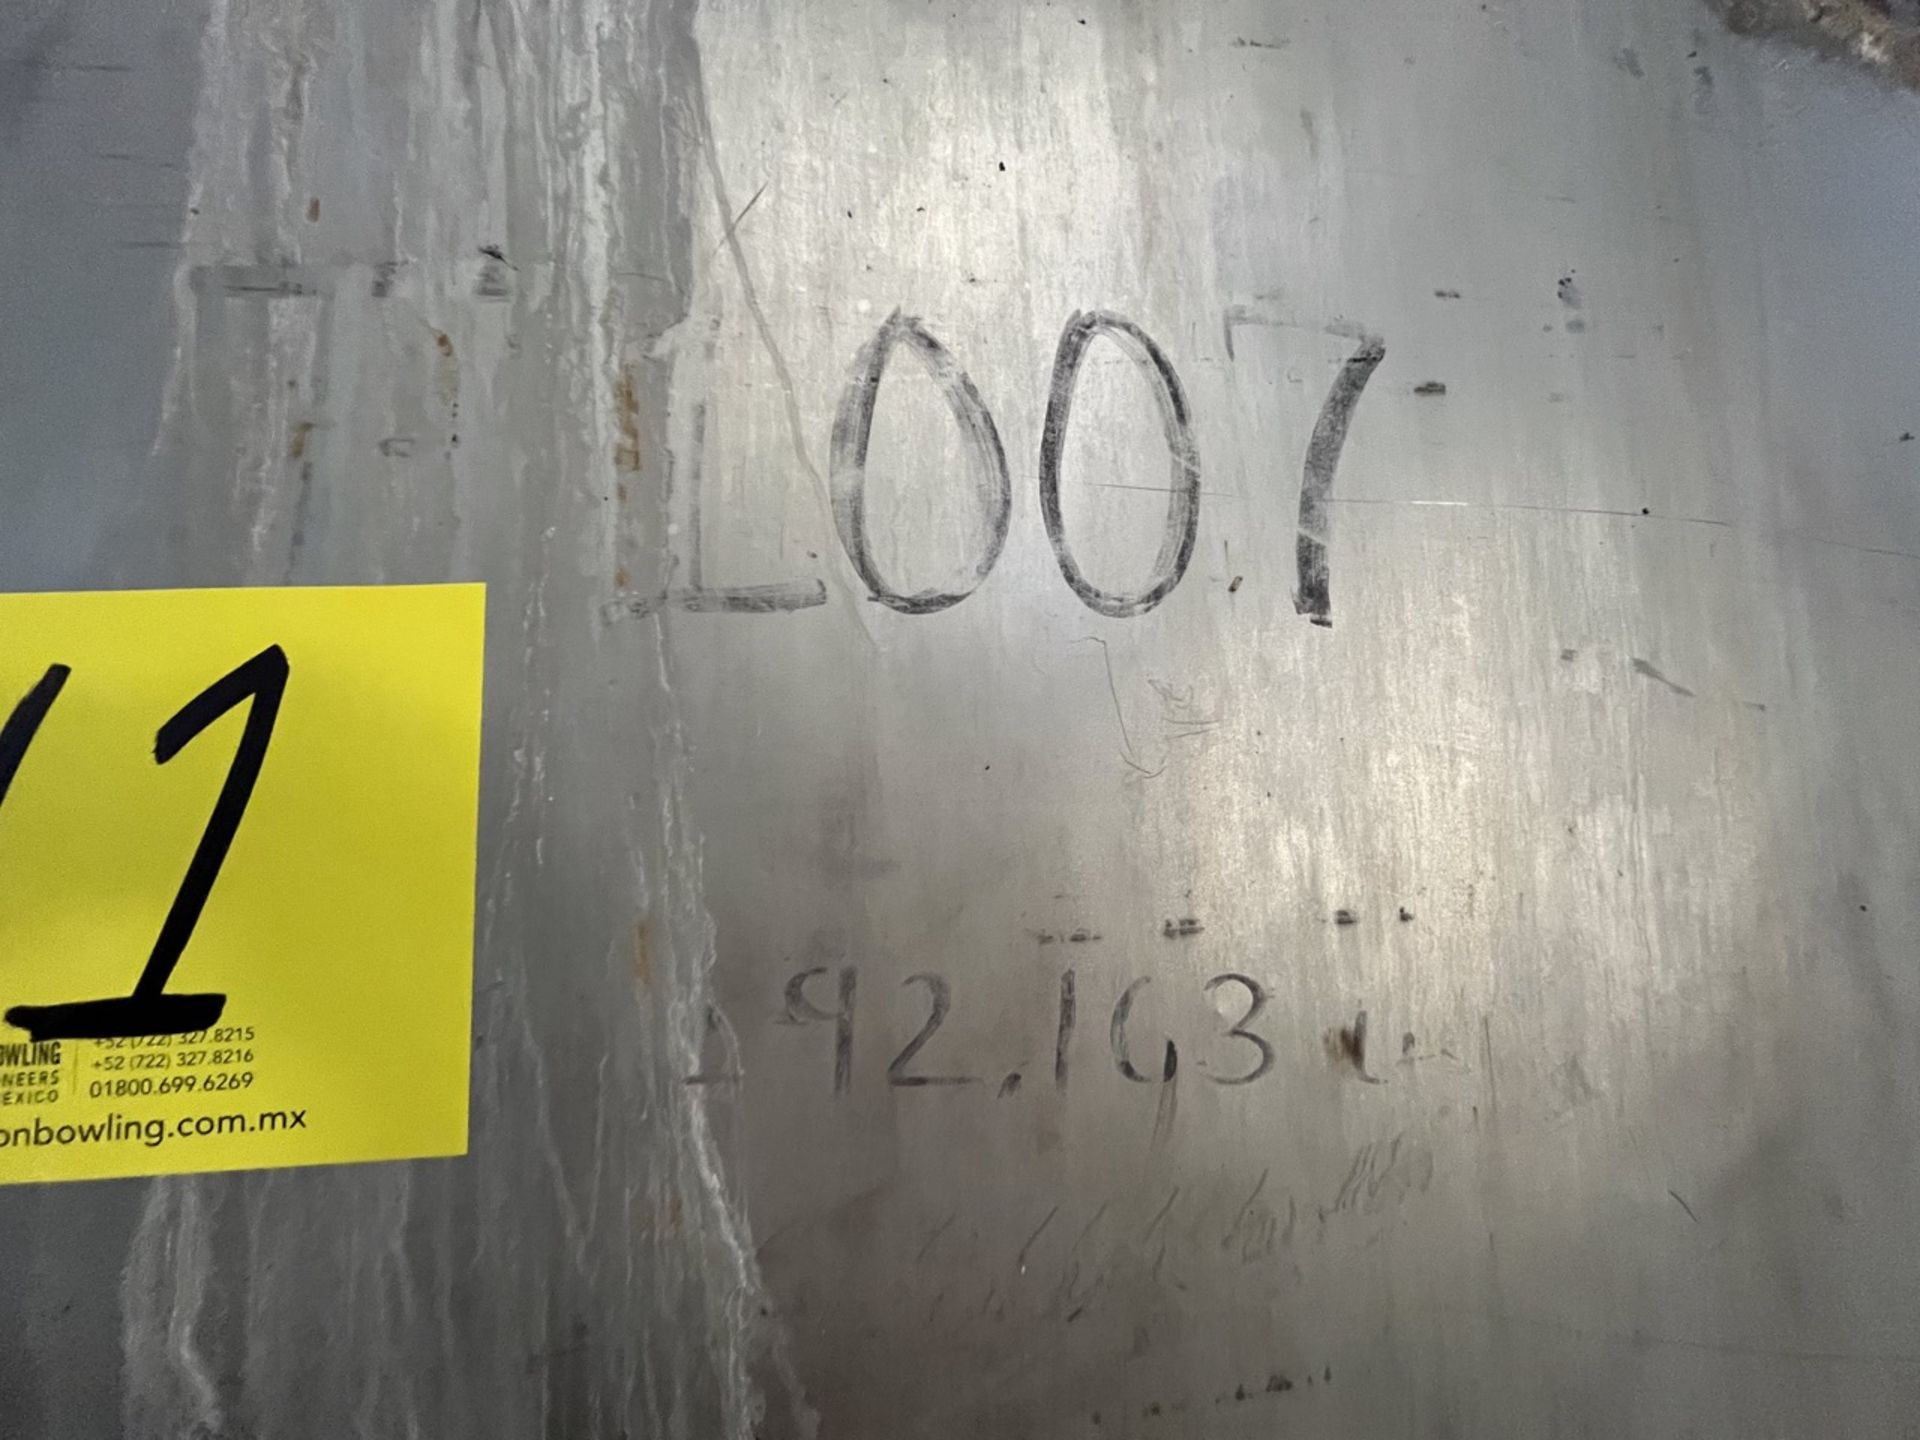 Stainless steel storage tank with a capacity of 192,163 liters, measuring approximately 6 meters in - Bild 8 aus 9